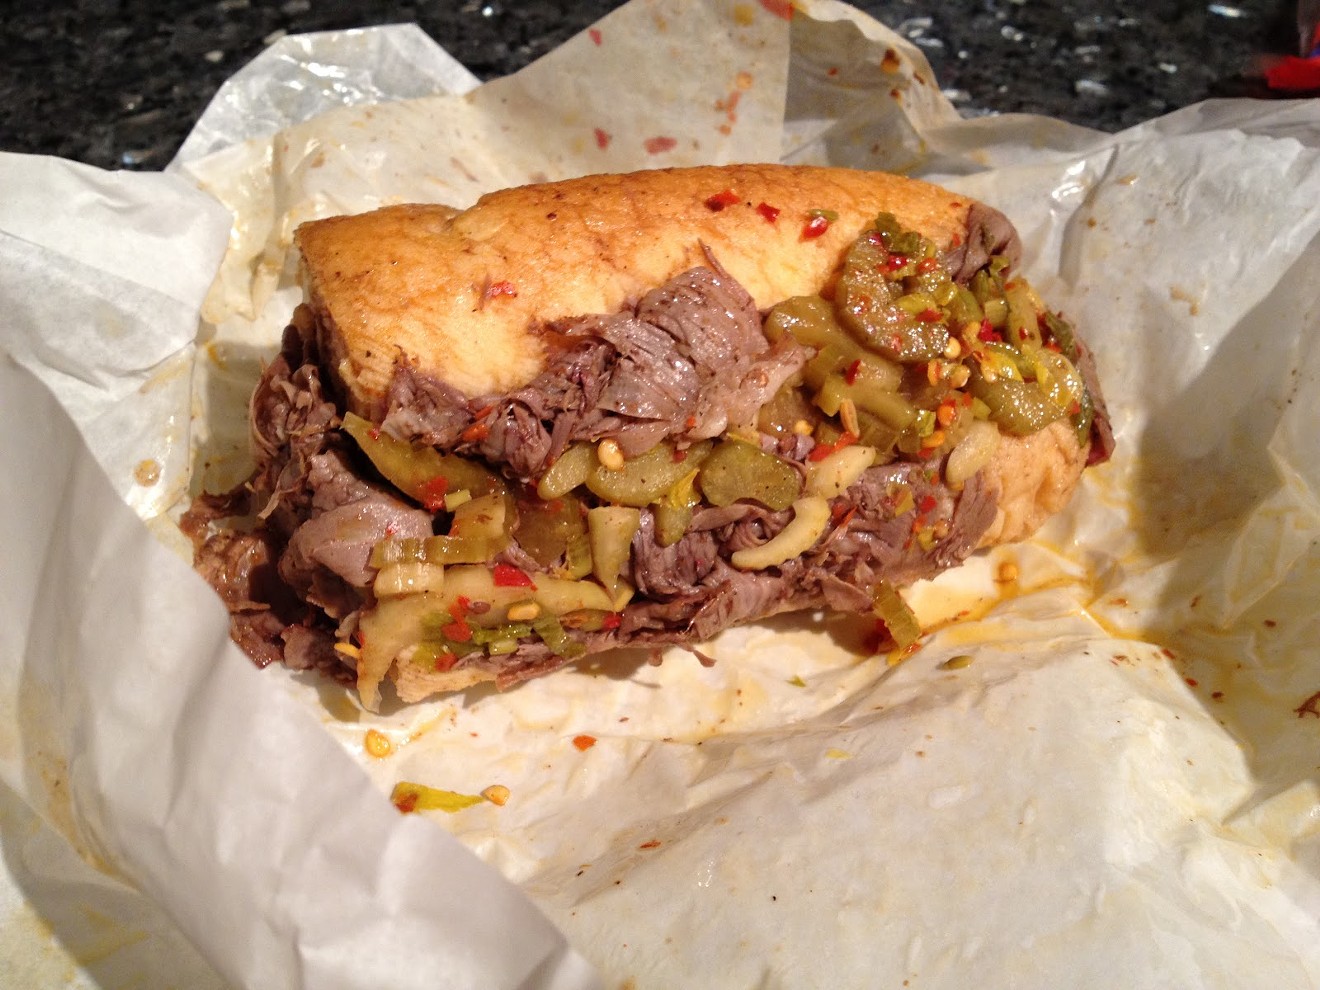 This is what you can expect from a messy but delicious Italian beef sandwiches.